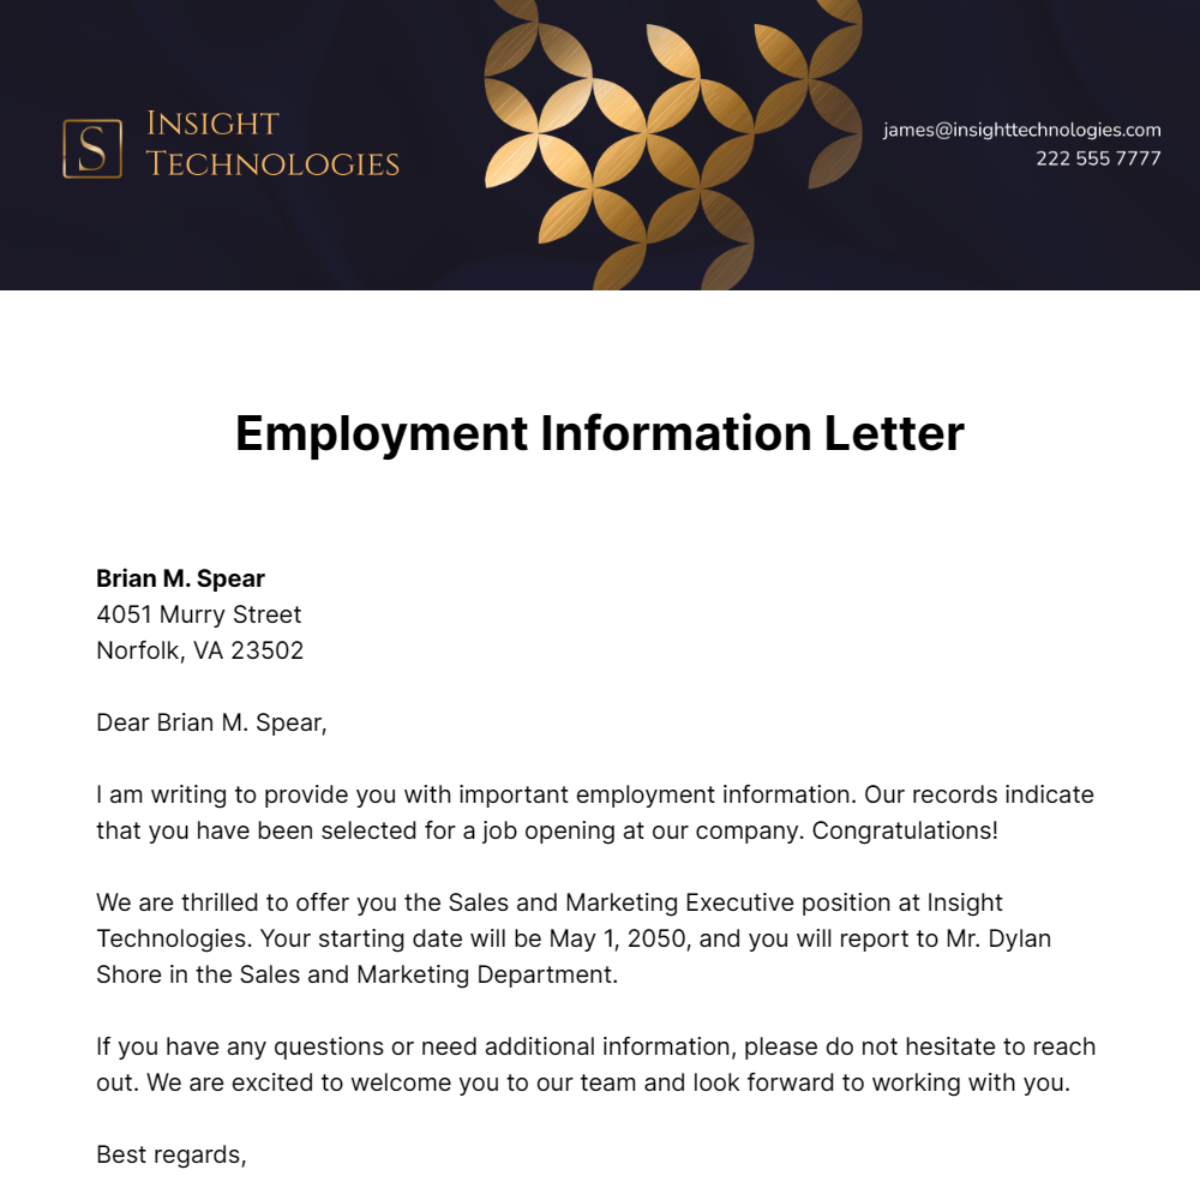 Employment Information Letter Template